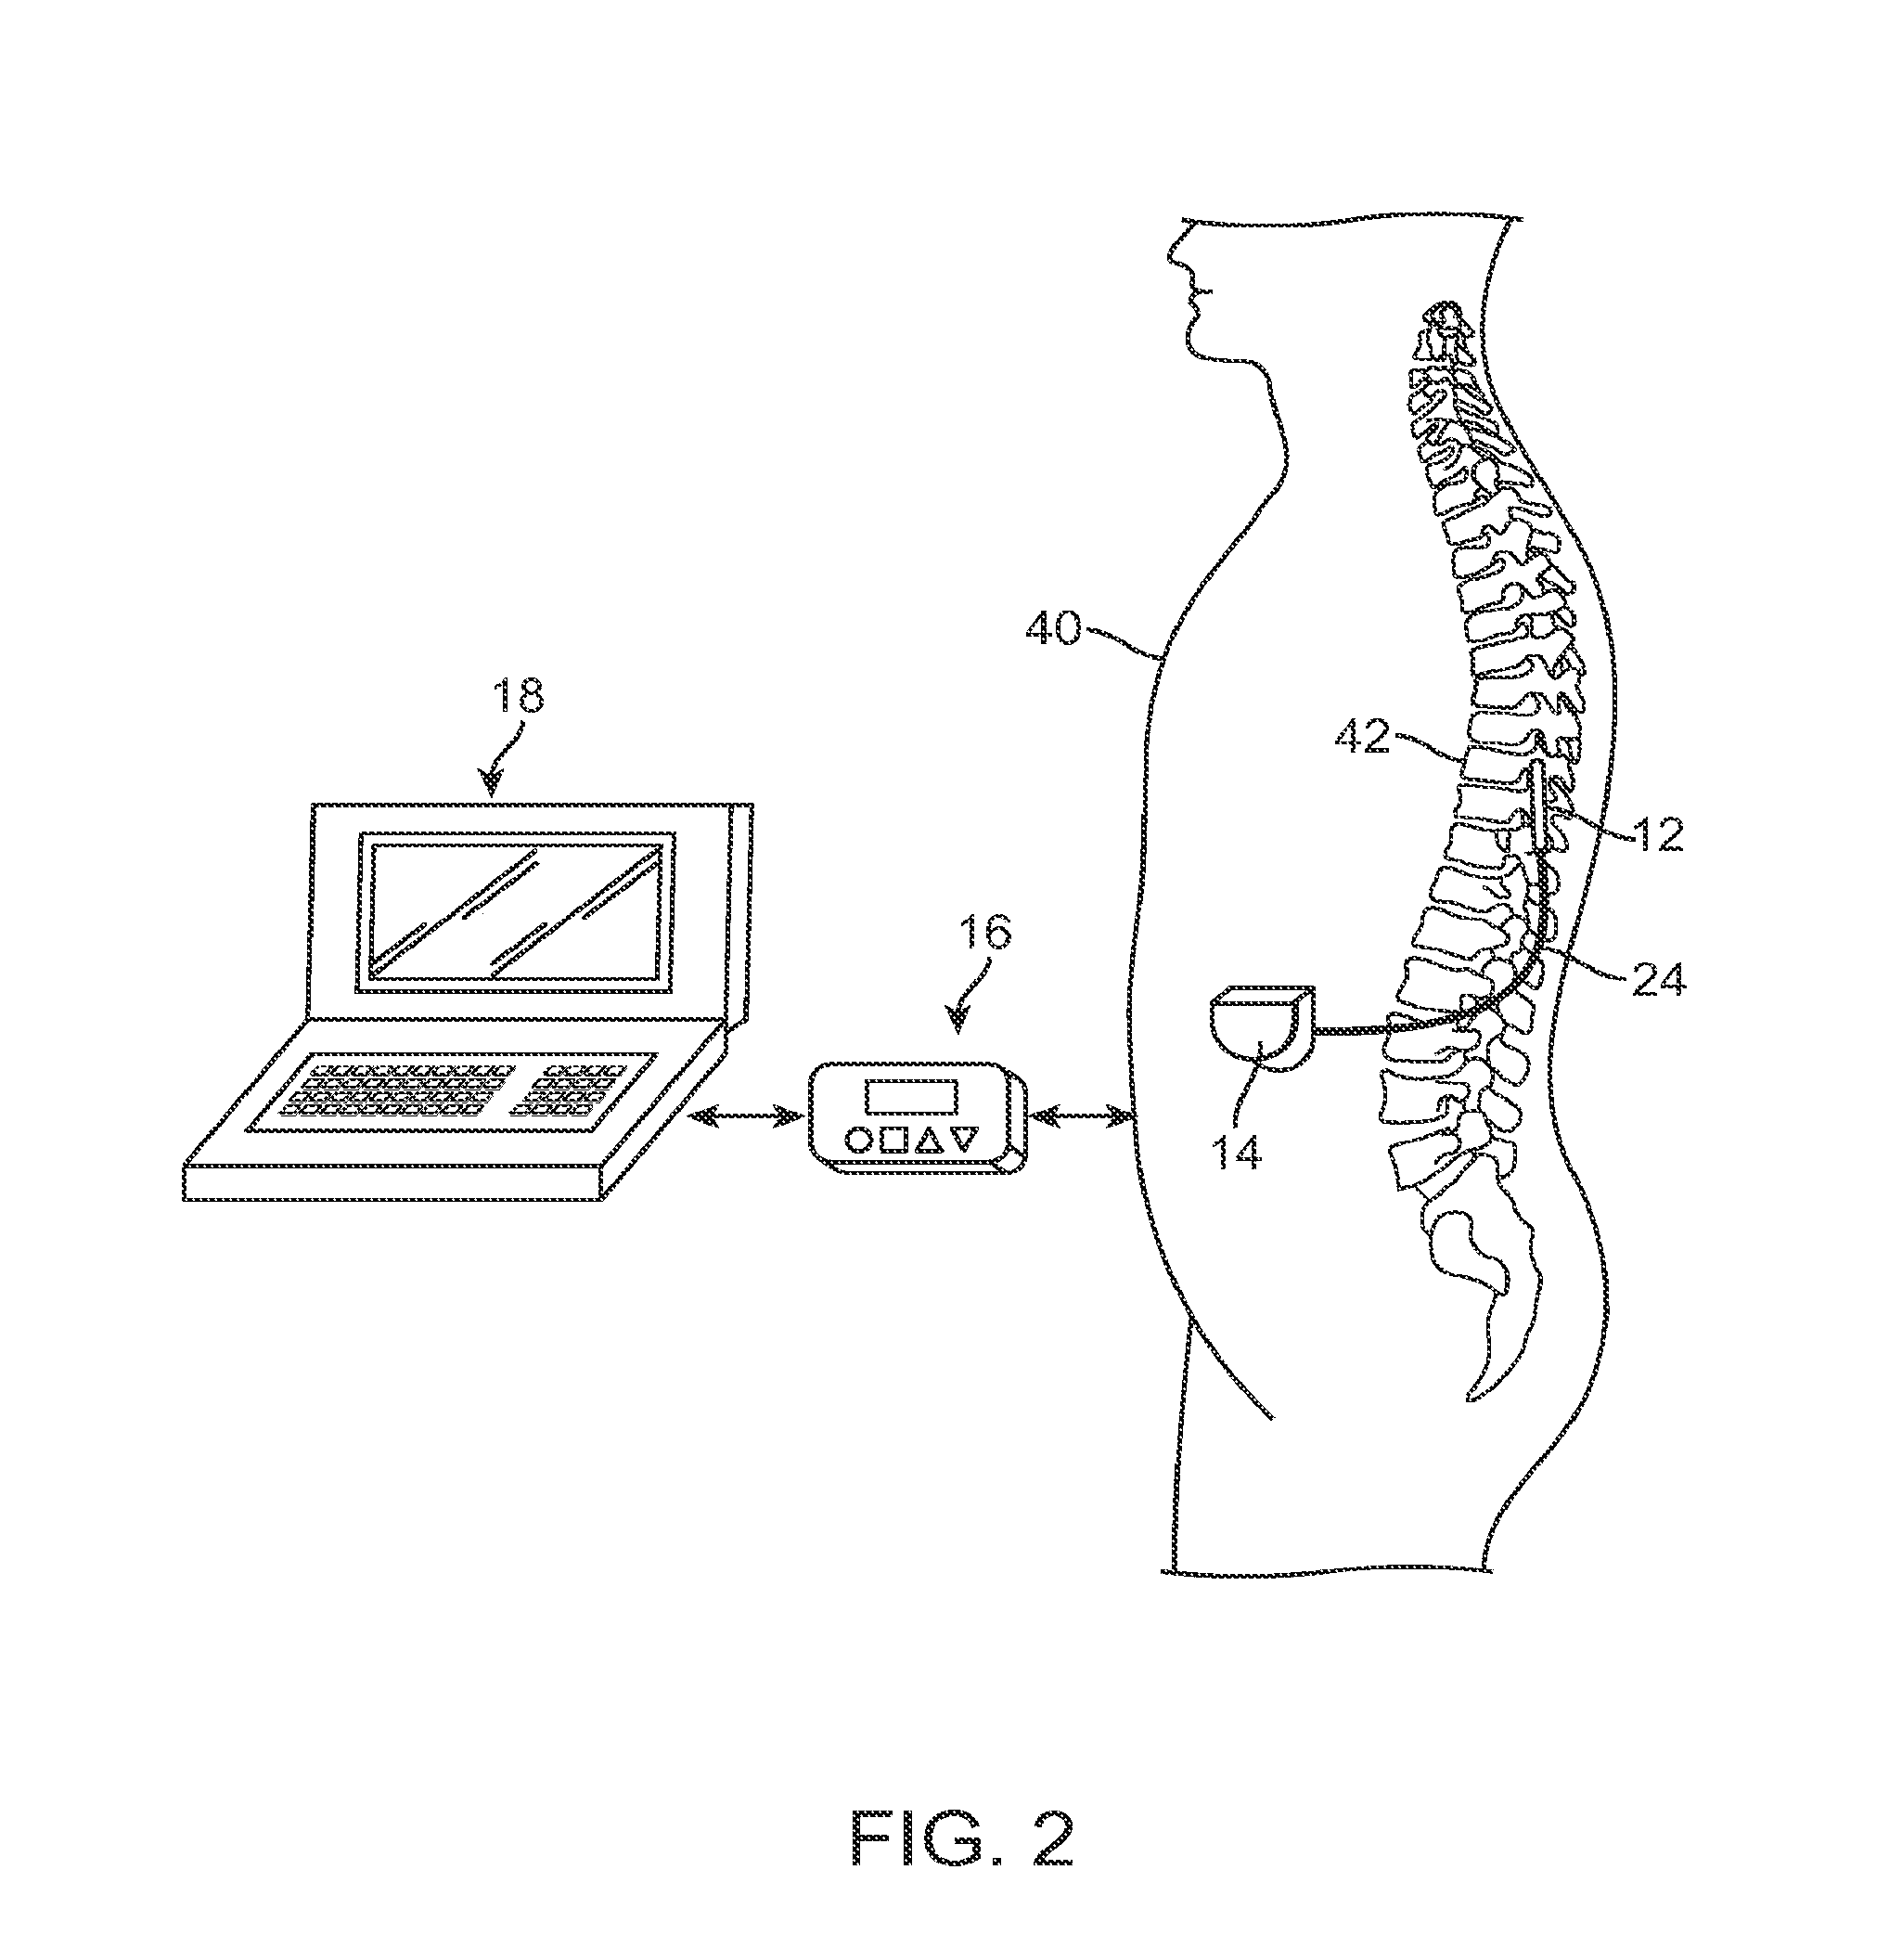 Methods and devices for treatment of non-neuropathic conditions using electrical stimulation